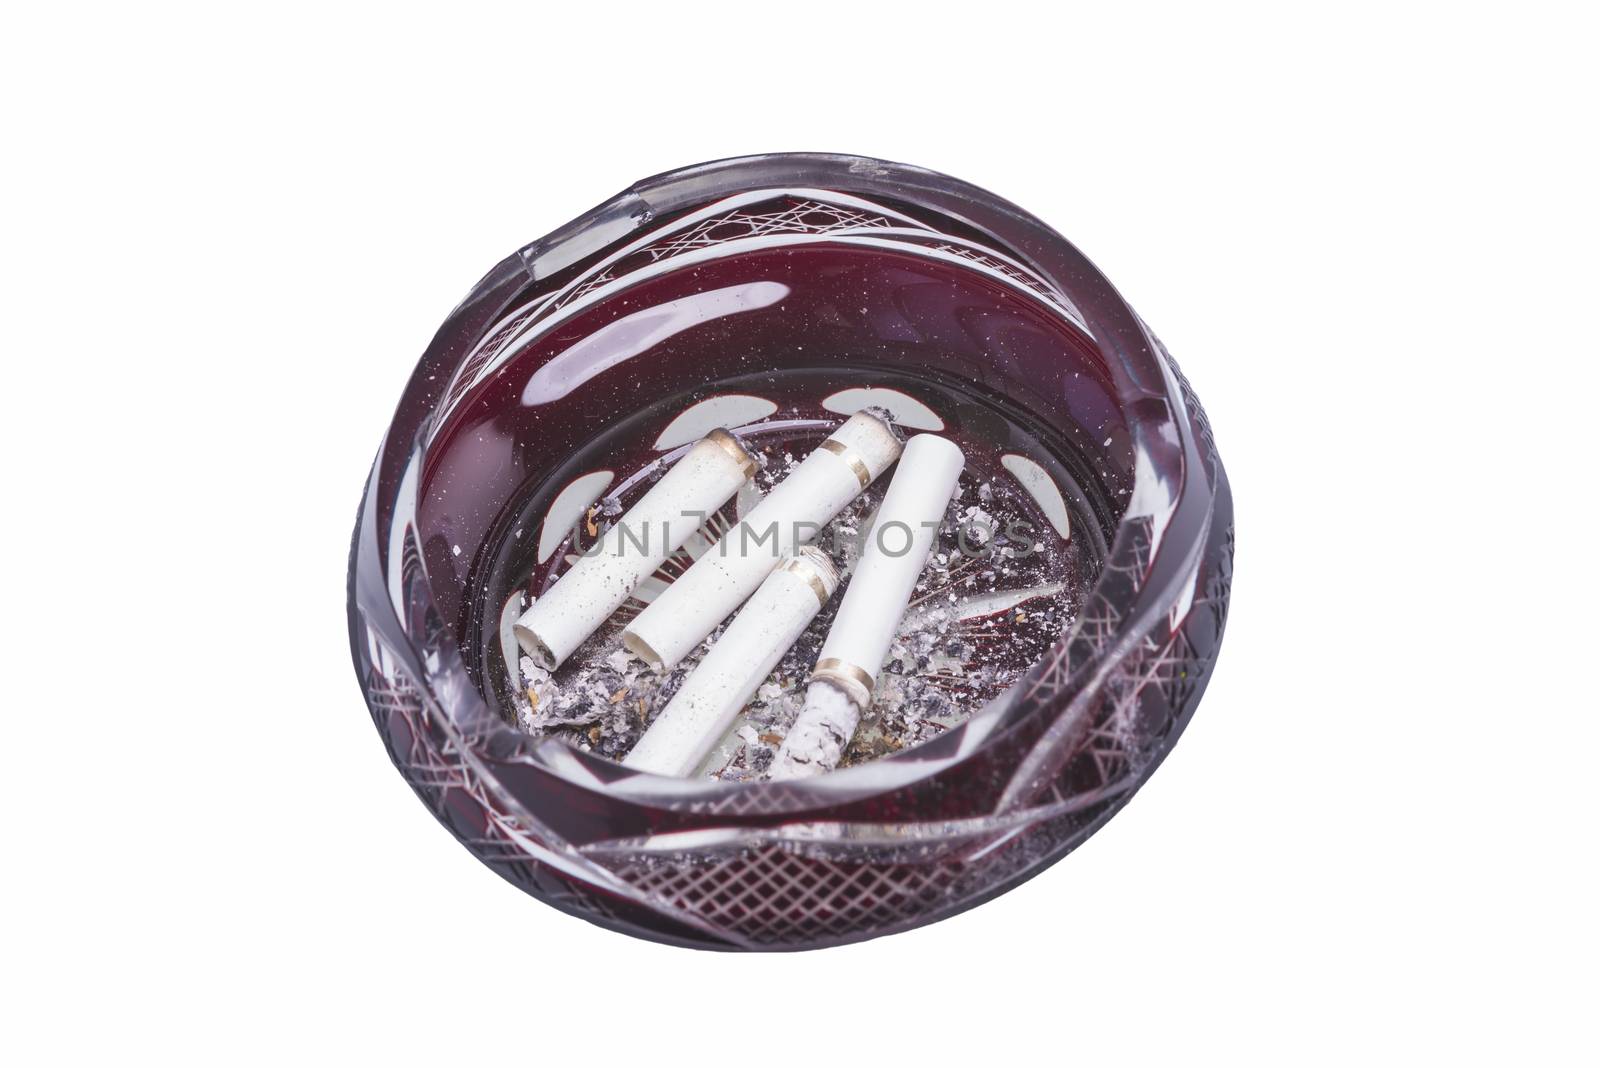 Cigarette butts in ashtray by savcoco